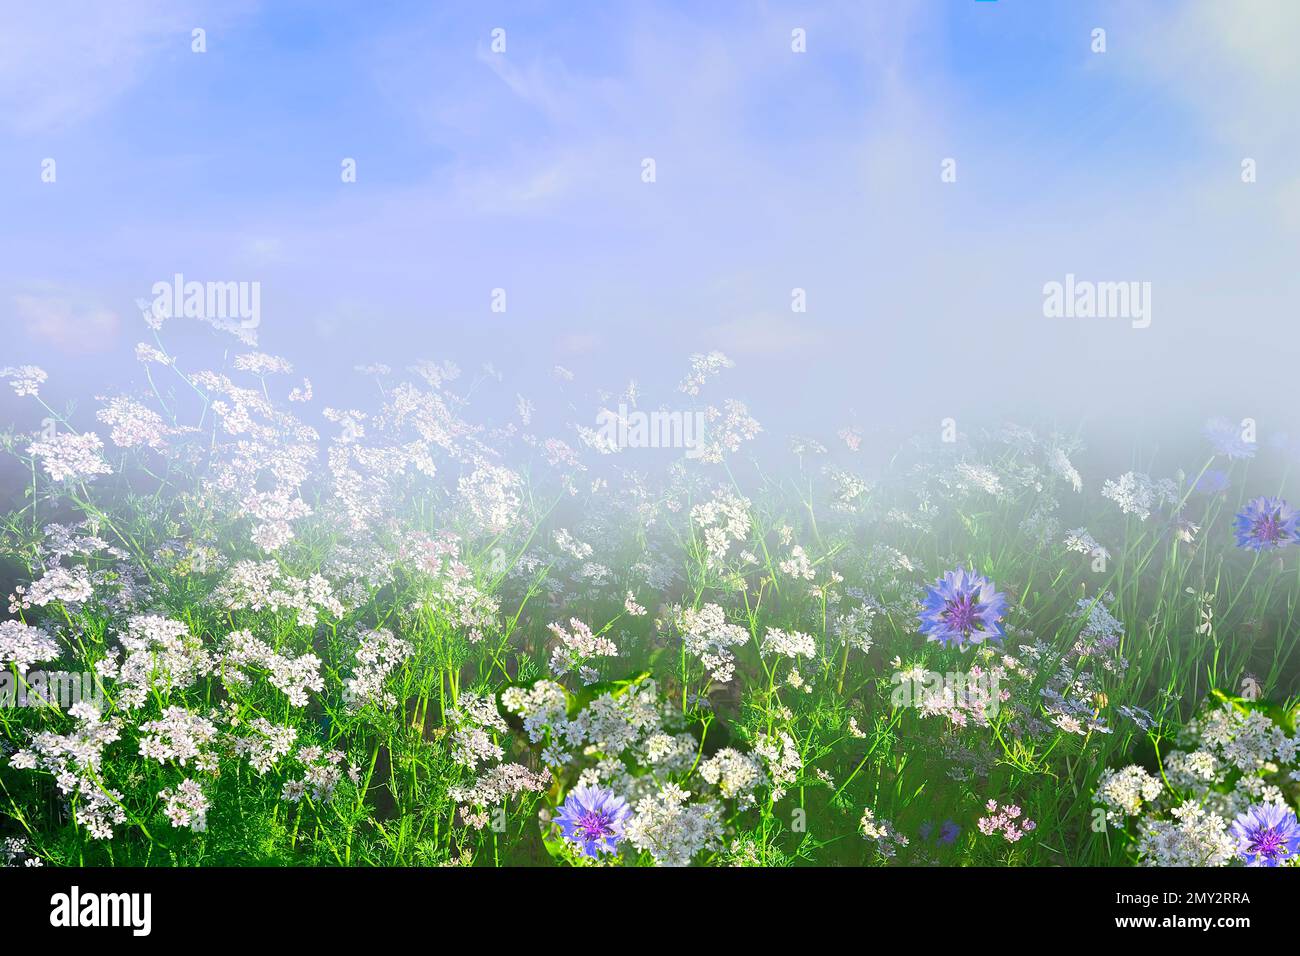 Summer blurred landscape - fog is rising over flowering meadow with tiny white flowers and blue cornflowers. Morning freshness and amazing beauty of s Stock Photo